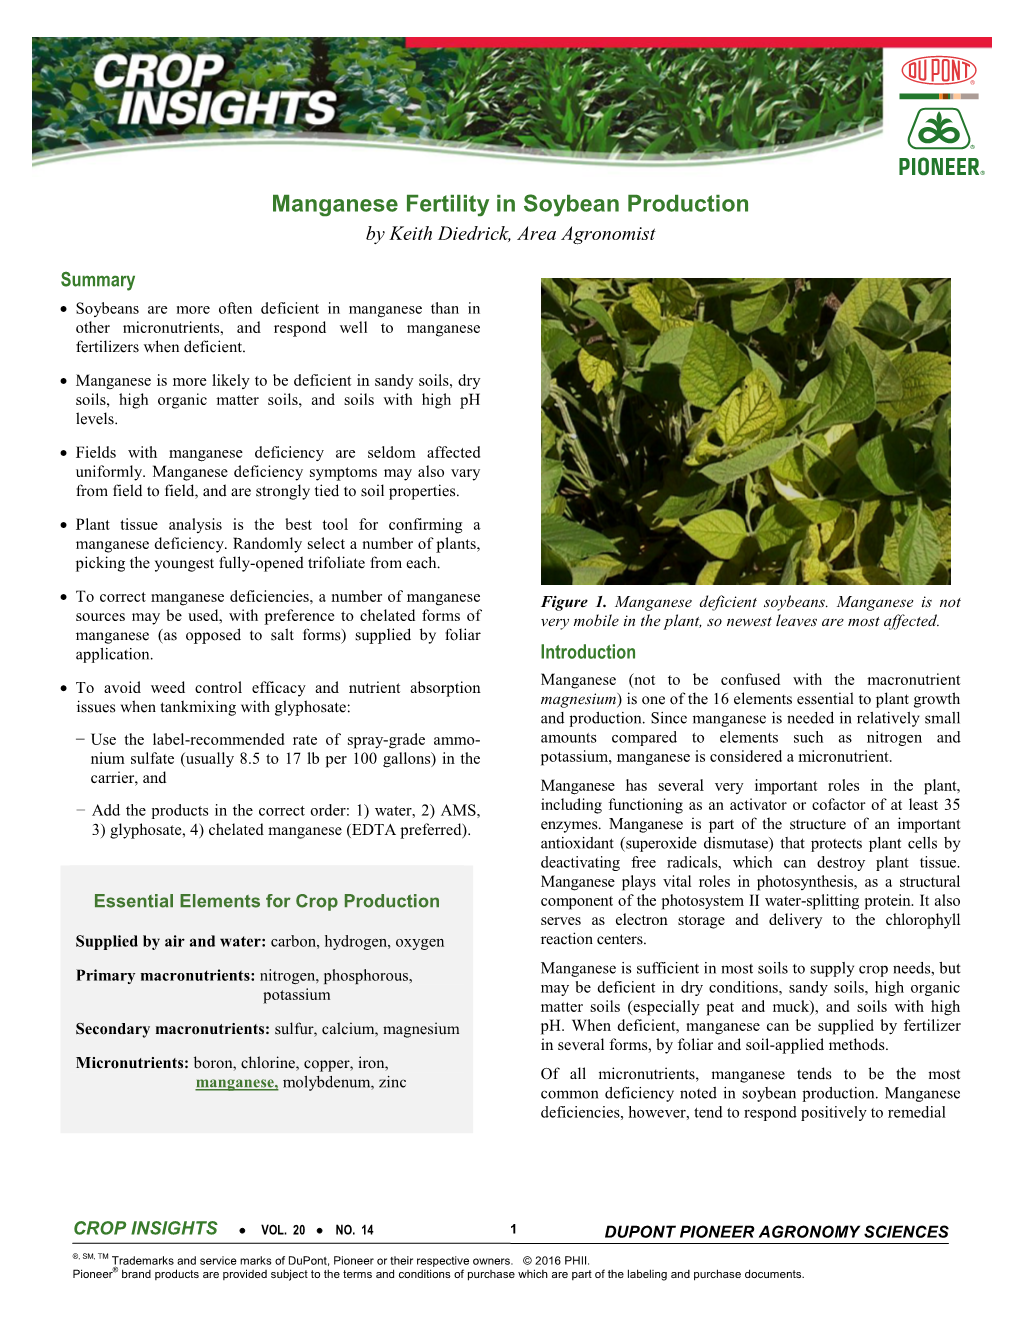 Manganese Fertility in Soybean Production by Keith Diedrick, Area Agronomist